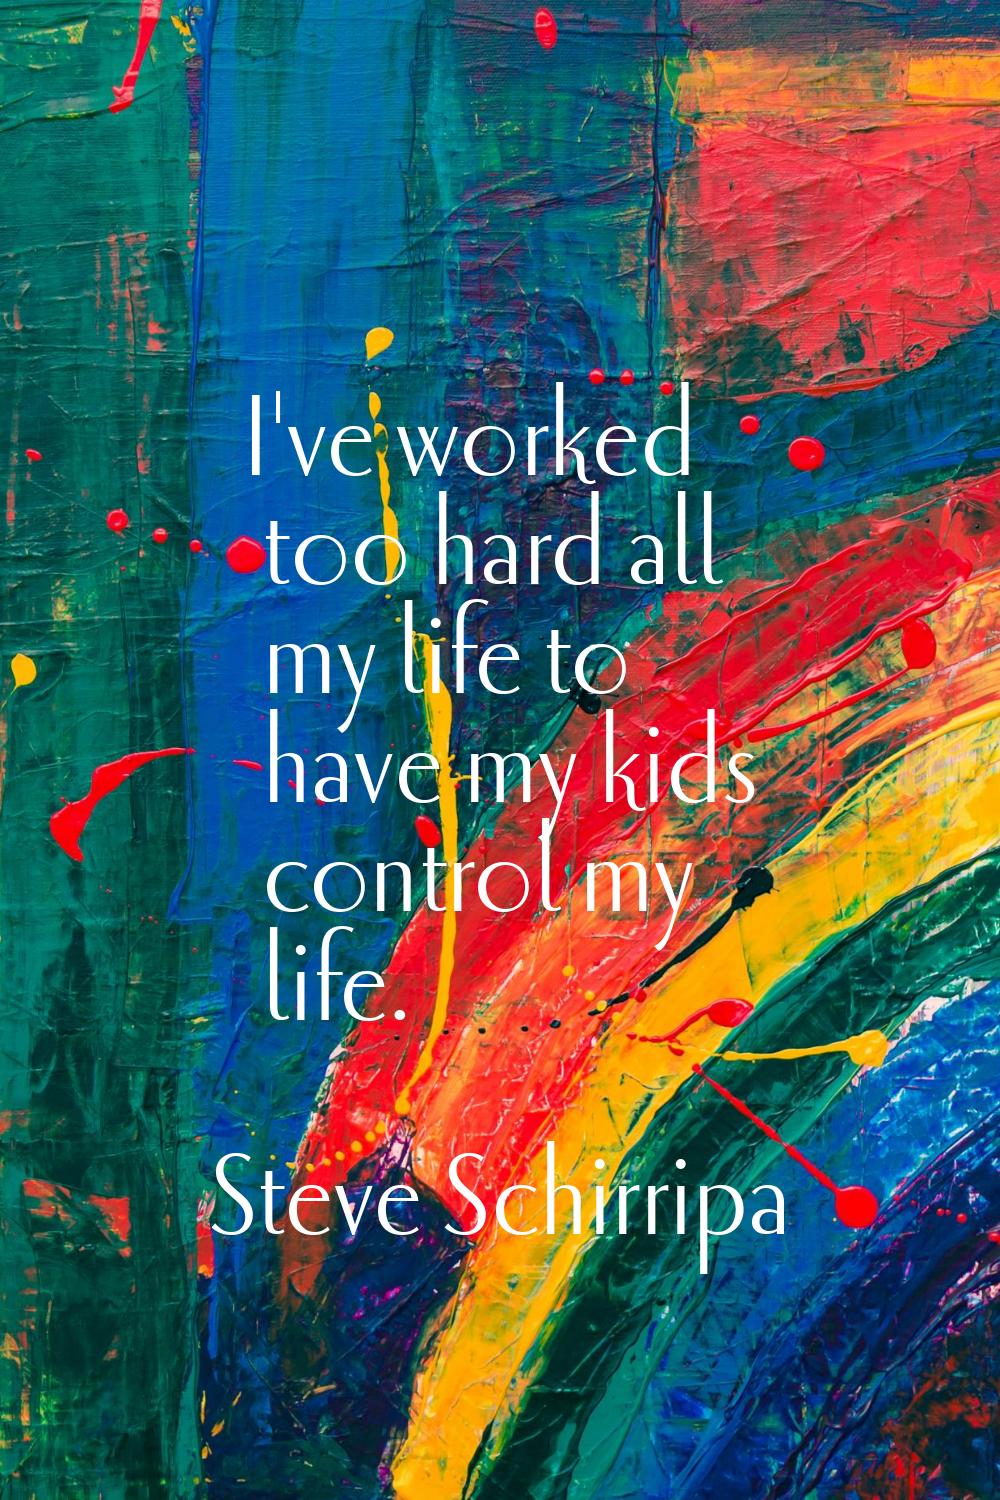 I've worked too hard all my life to have my kids control my life.